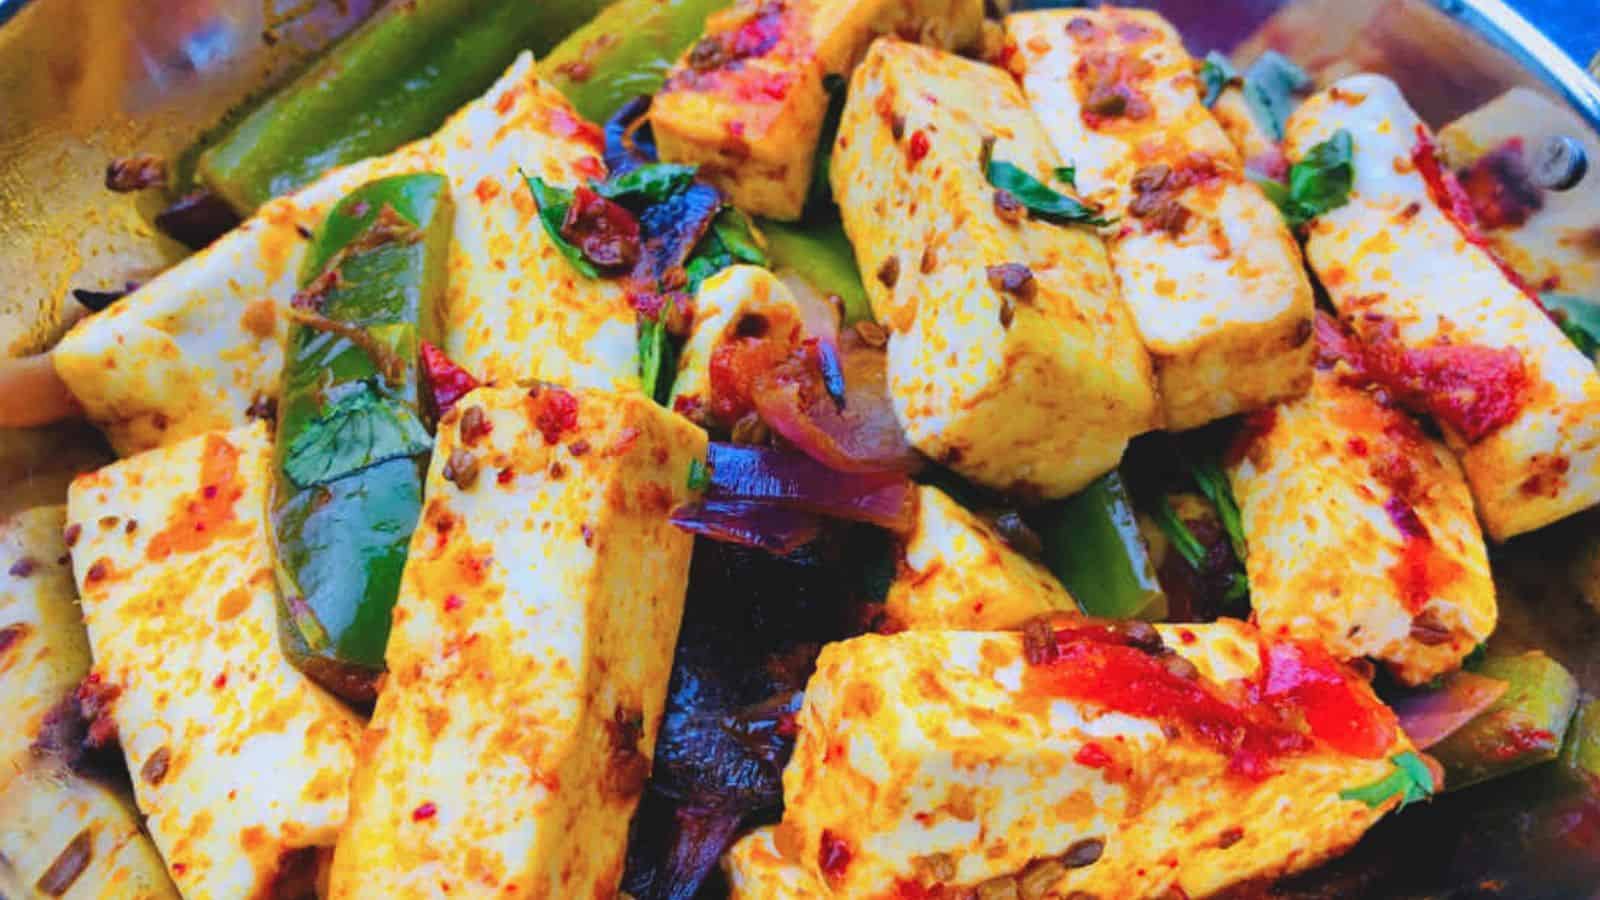 Kadai Paneer dish with slices of green bell peppers and red spices, garnished with herbs, served in a steel dish.